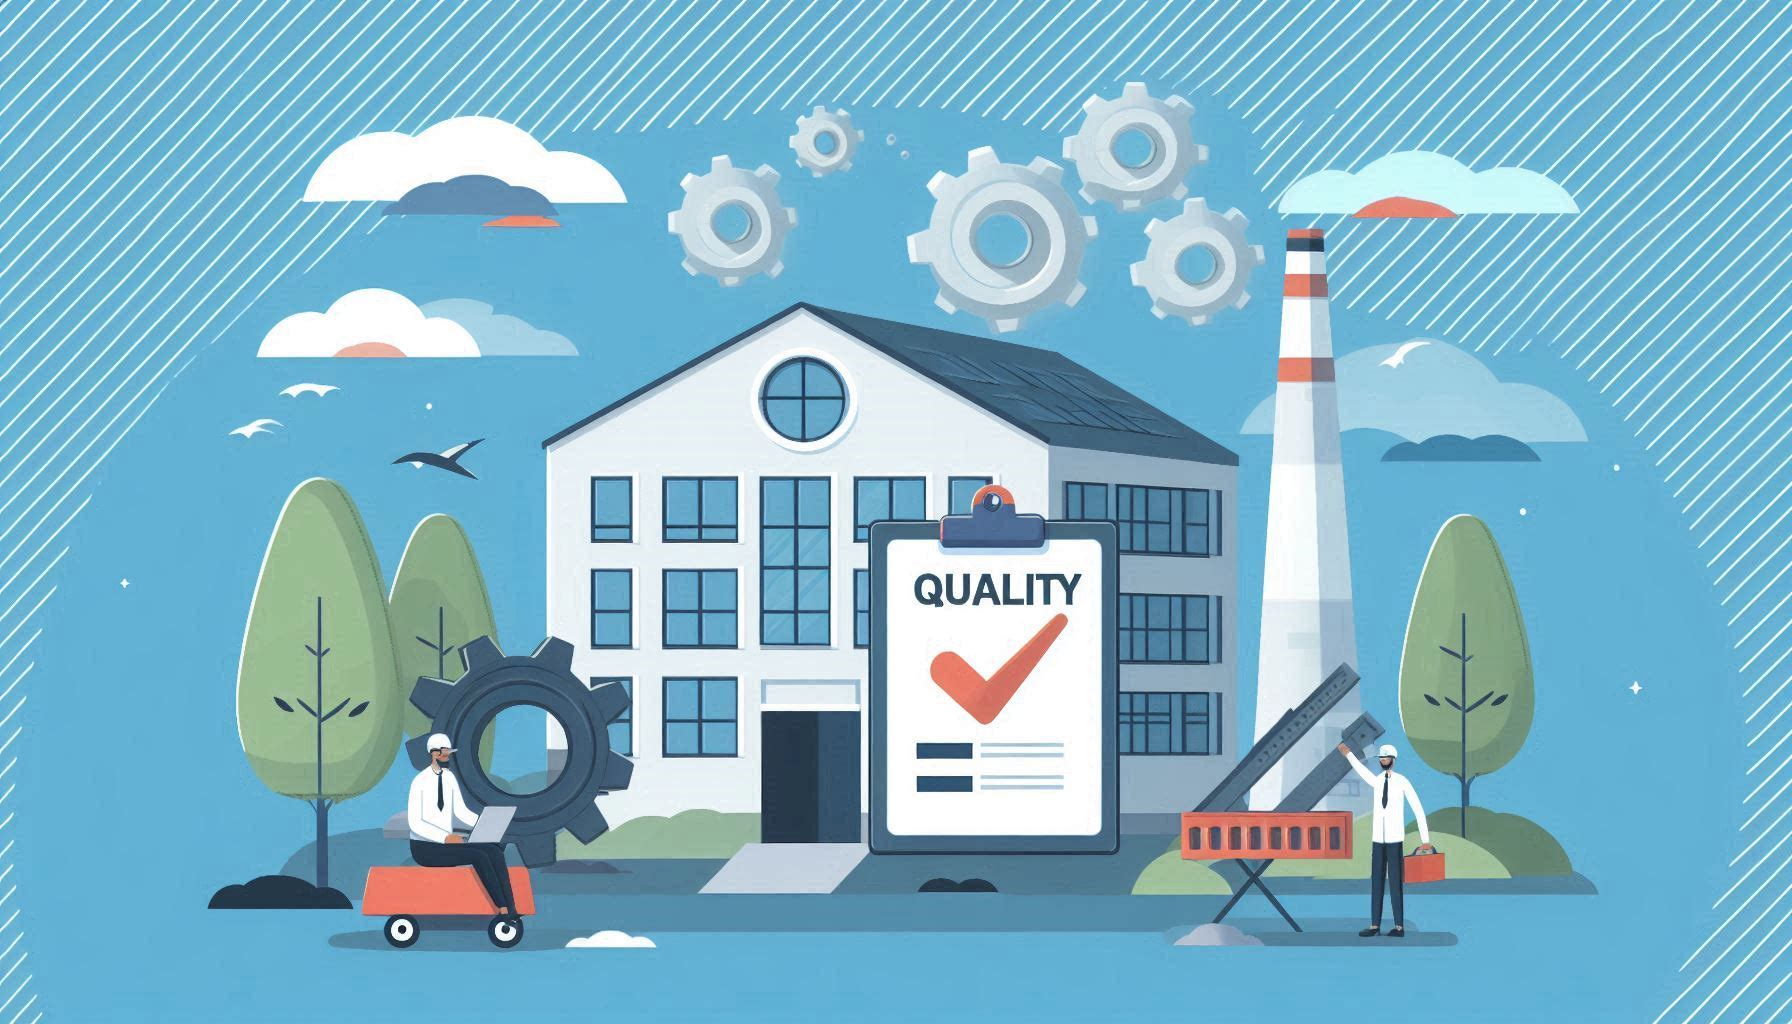 How to choose a quality control service provider?